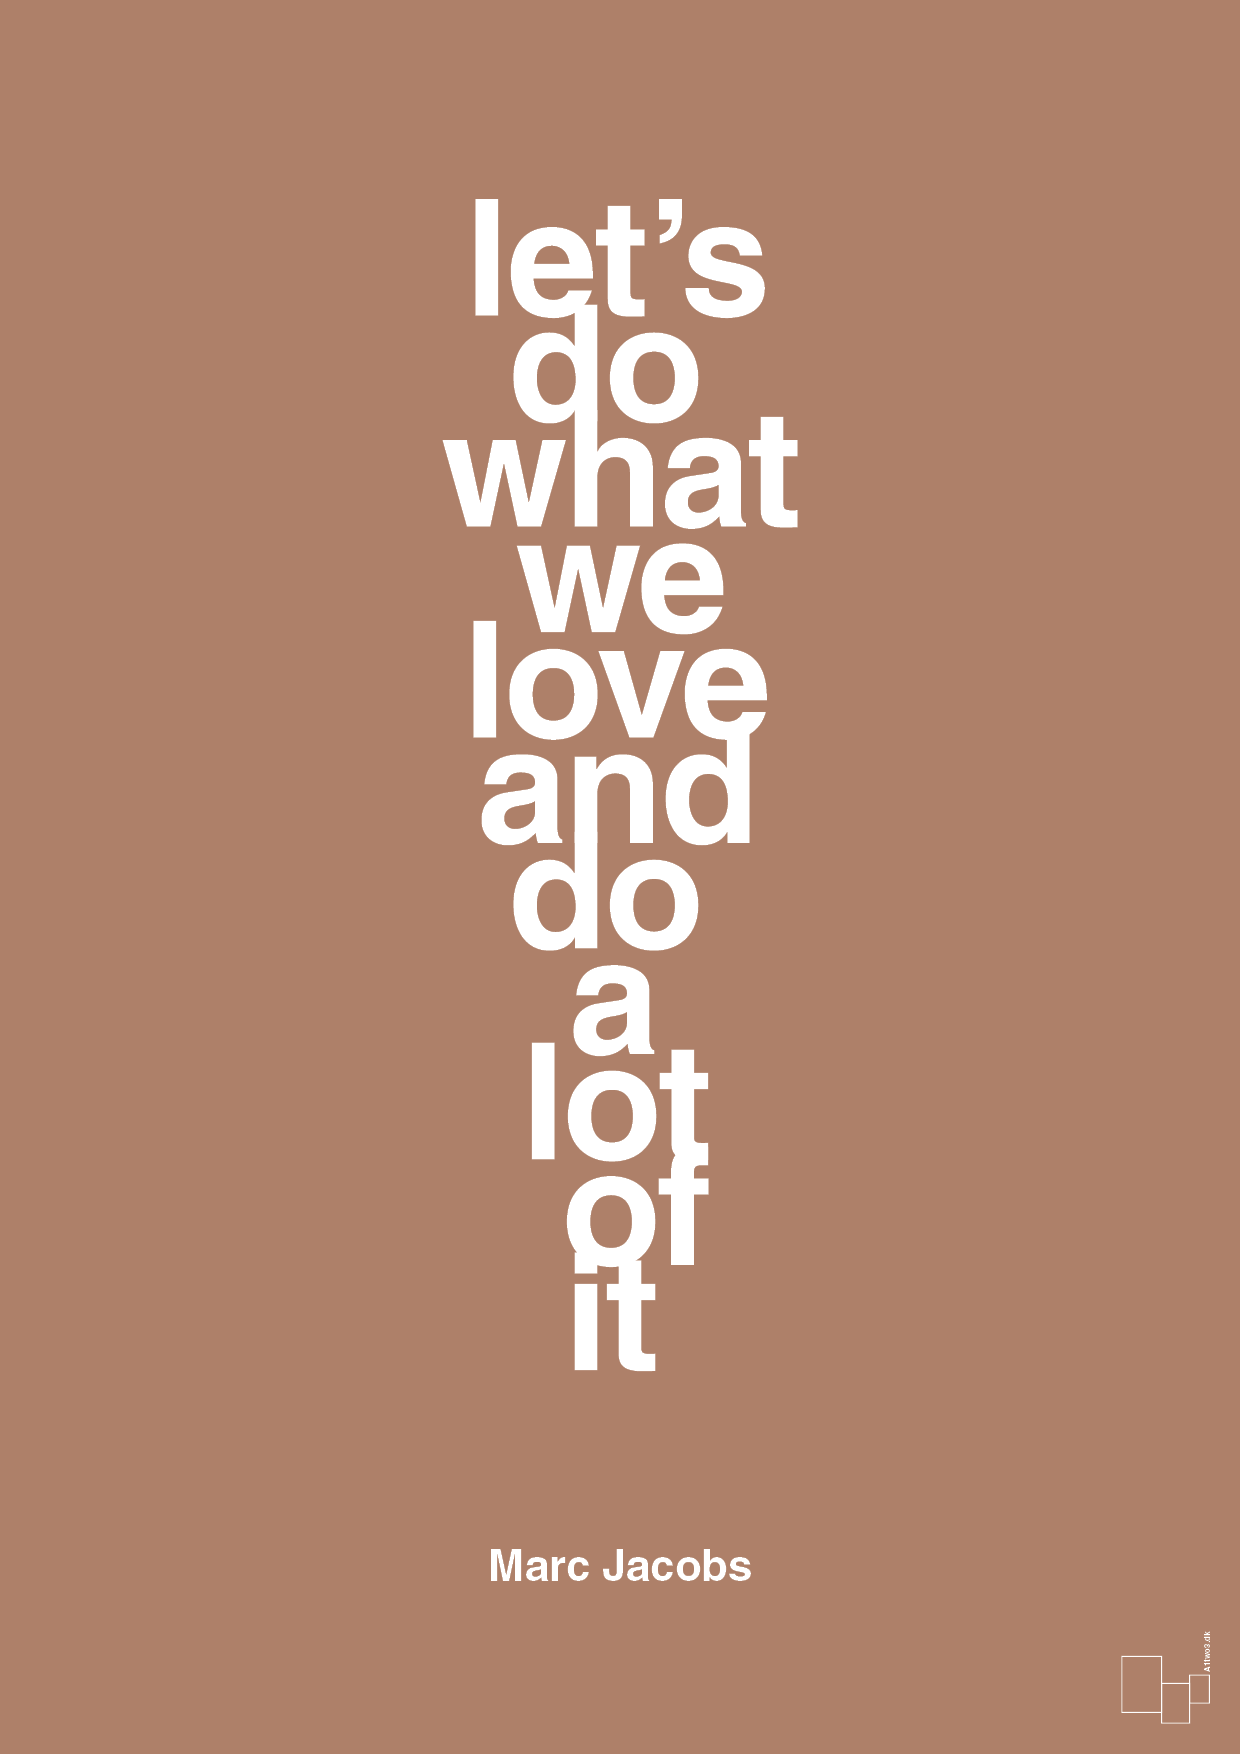 lets do what we love and do a lot of it - Plakat med Citater i Cider Spice